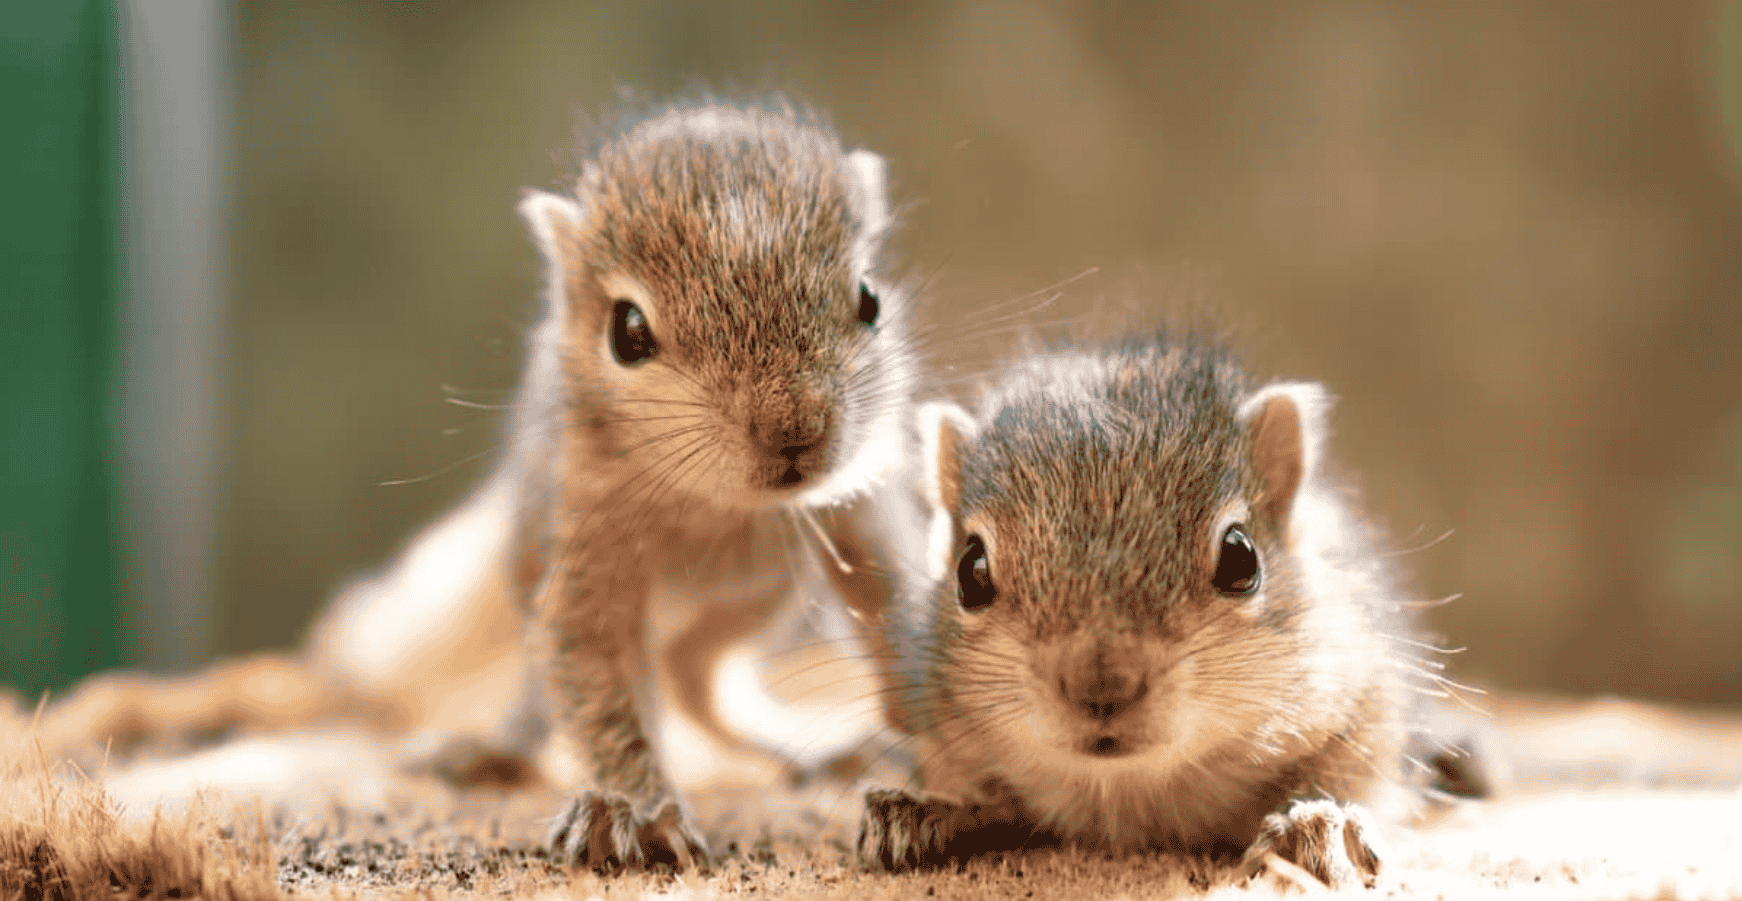 When Do Squirrels Have Babies?